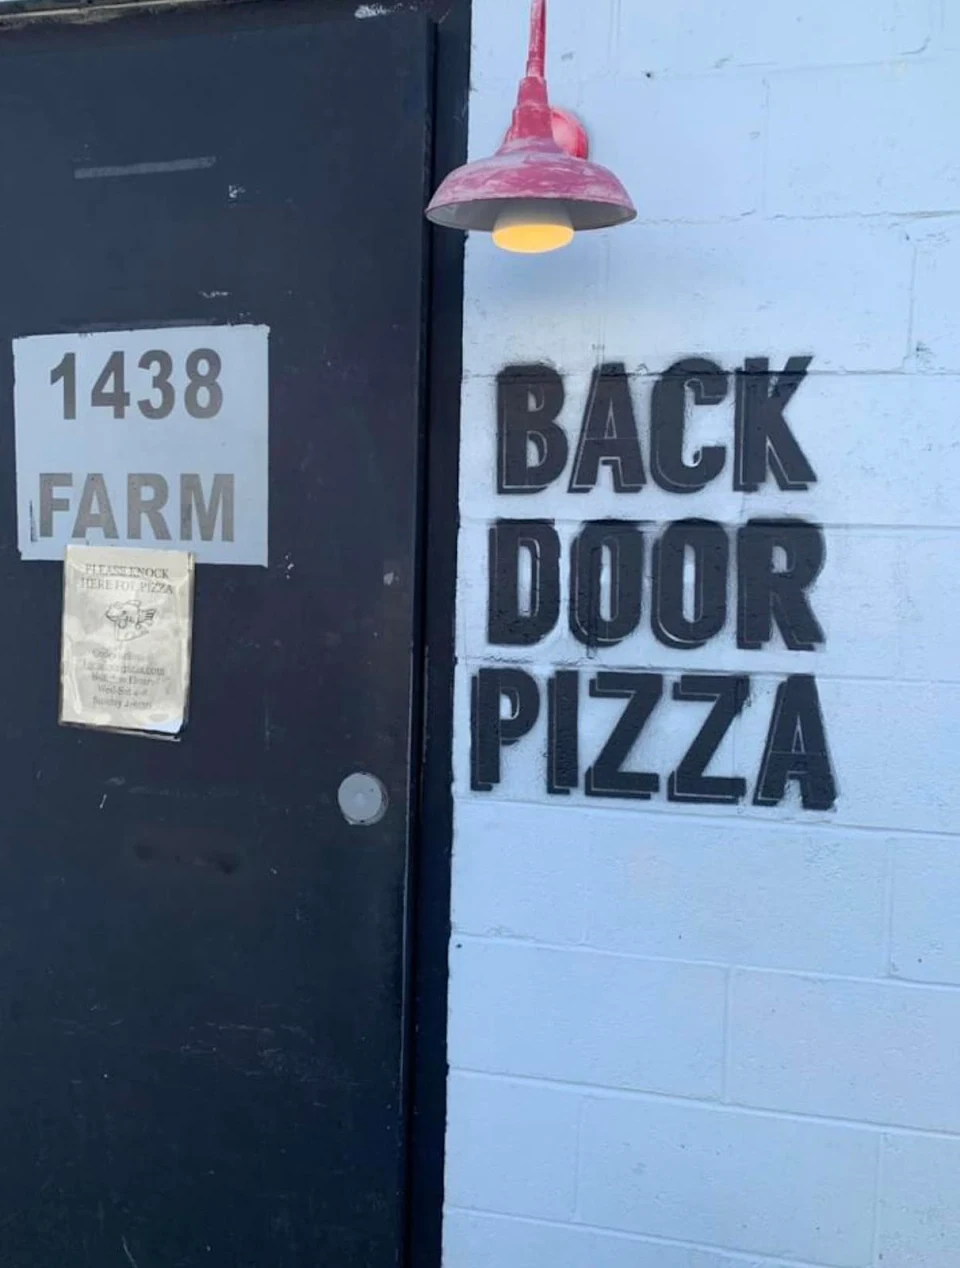 There’s a pizza place near me where you have to go to the back, knock, give cash, get pizza.